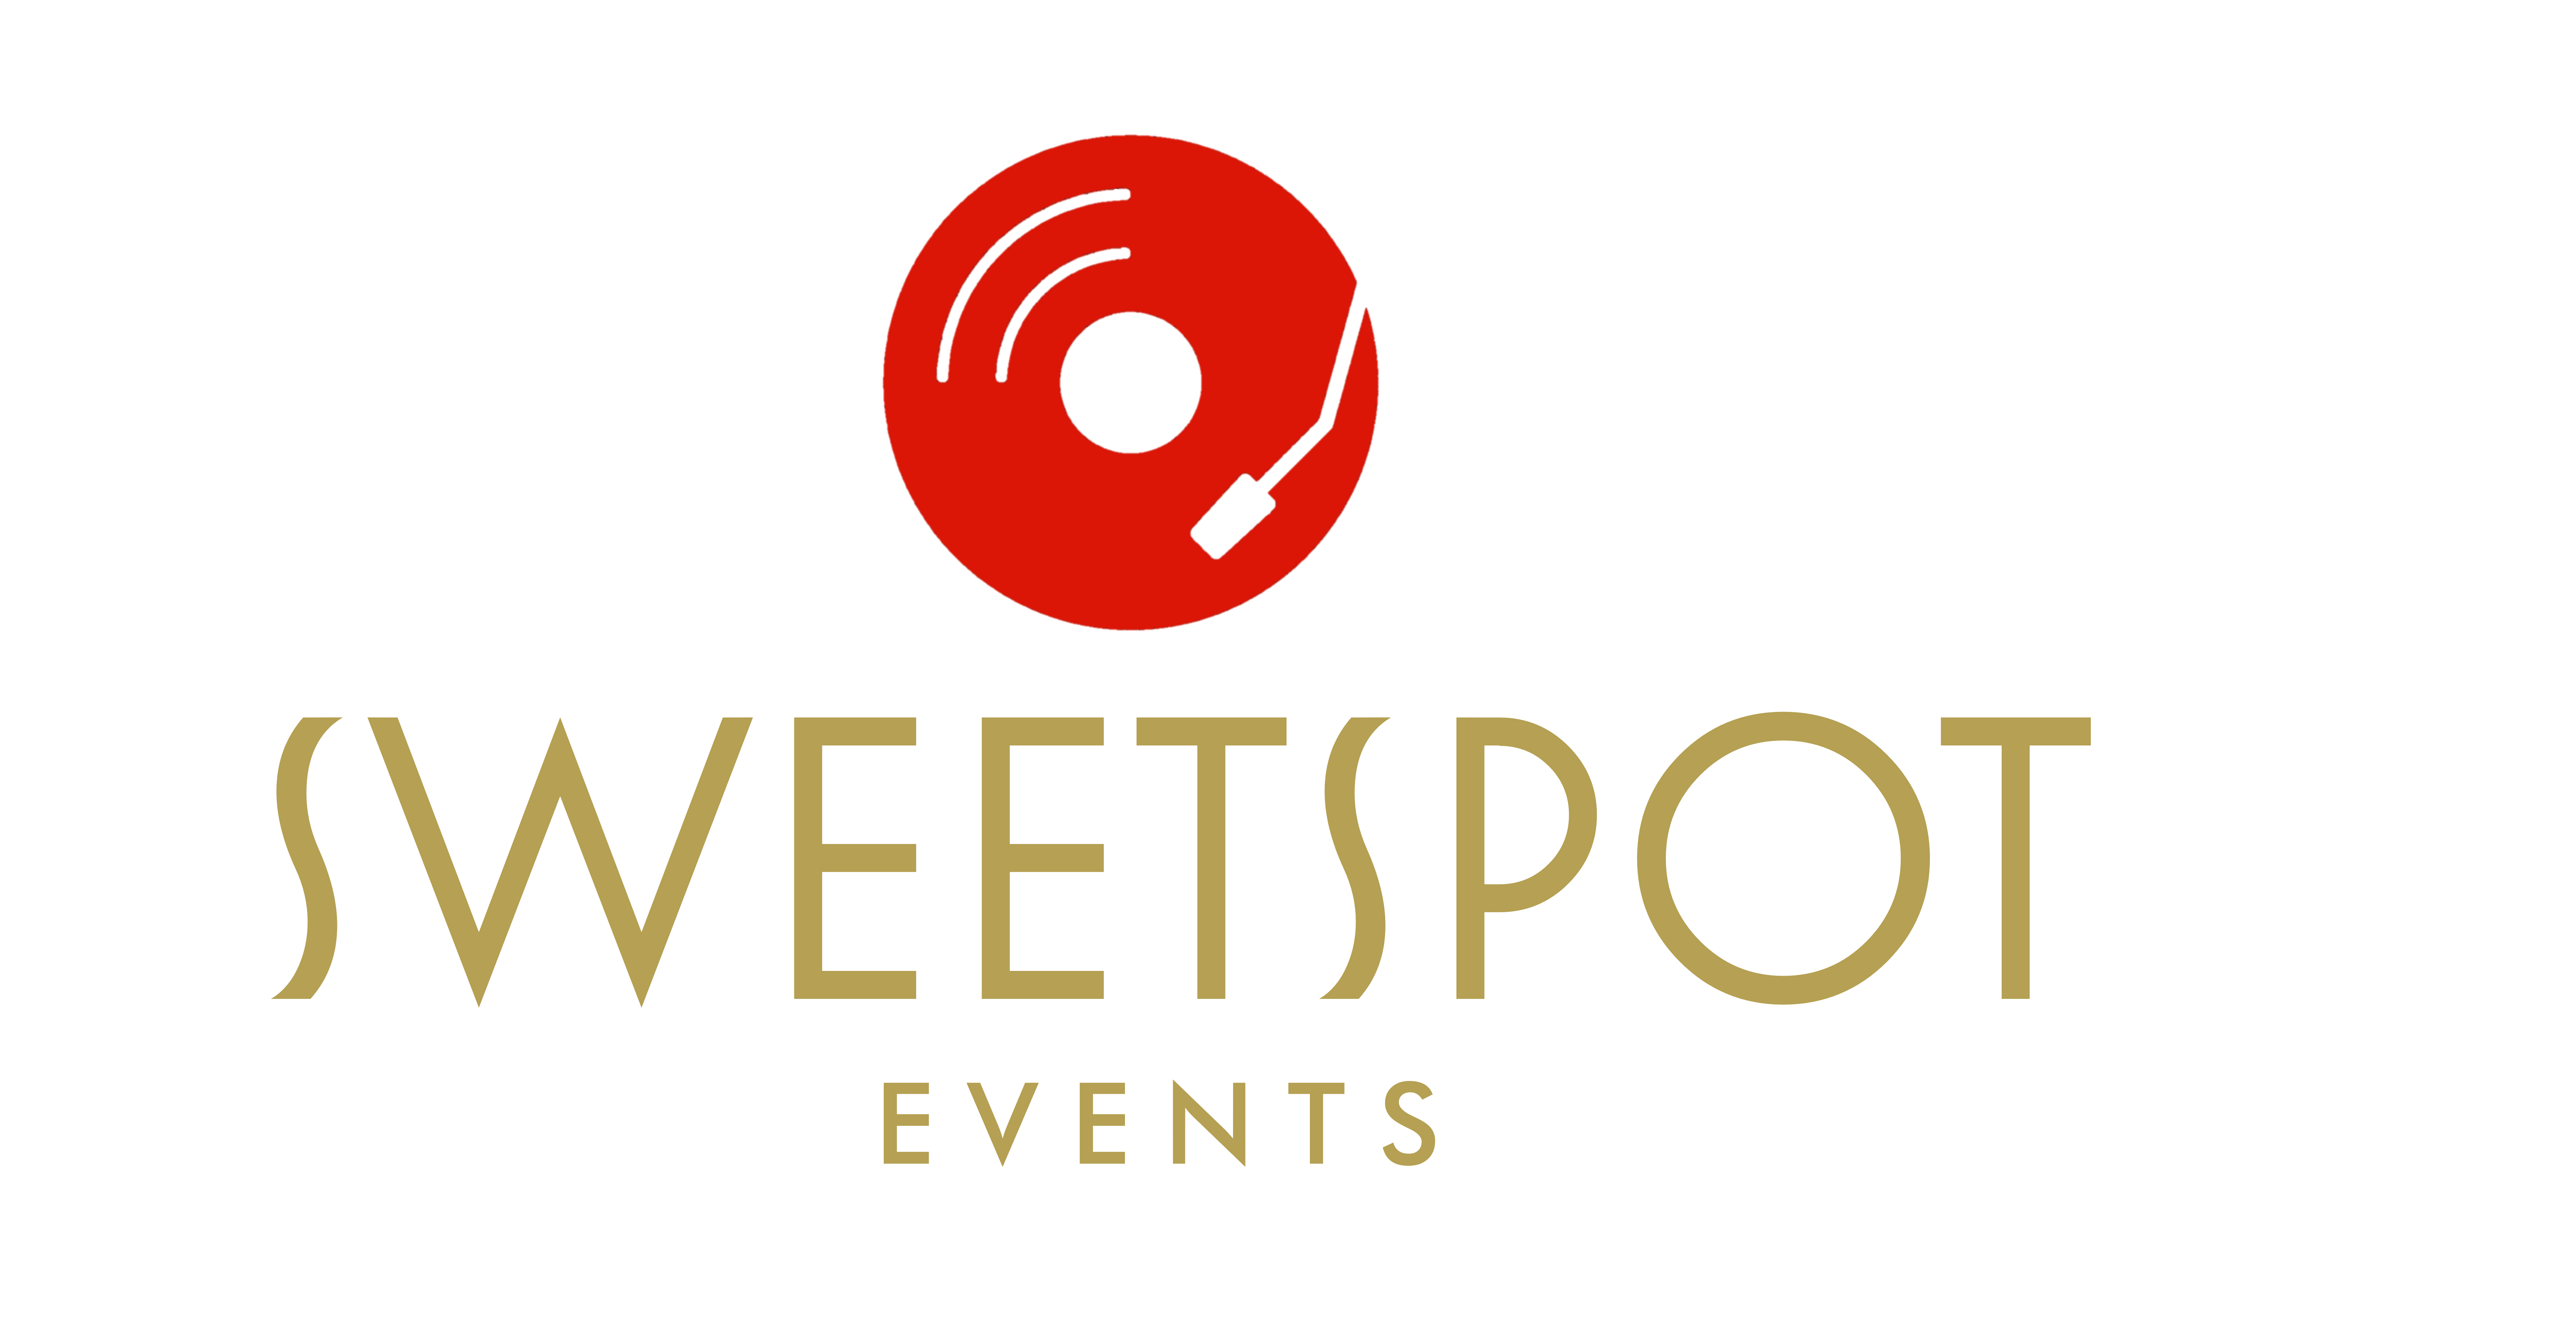 sweetspot events